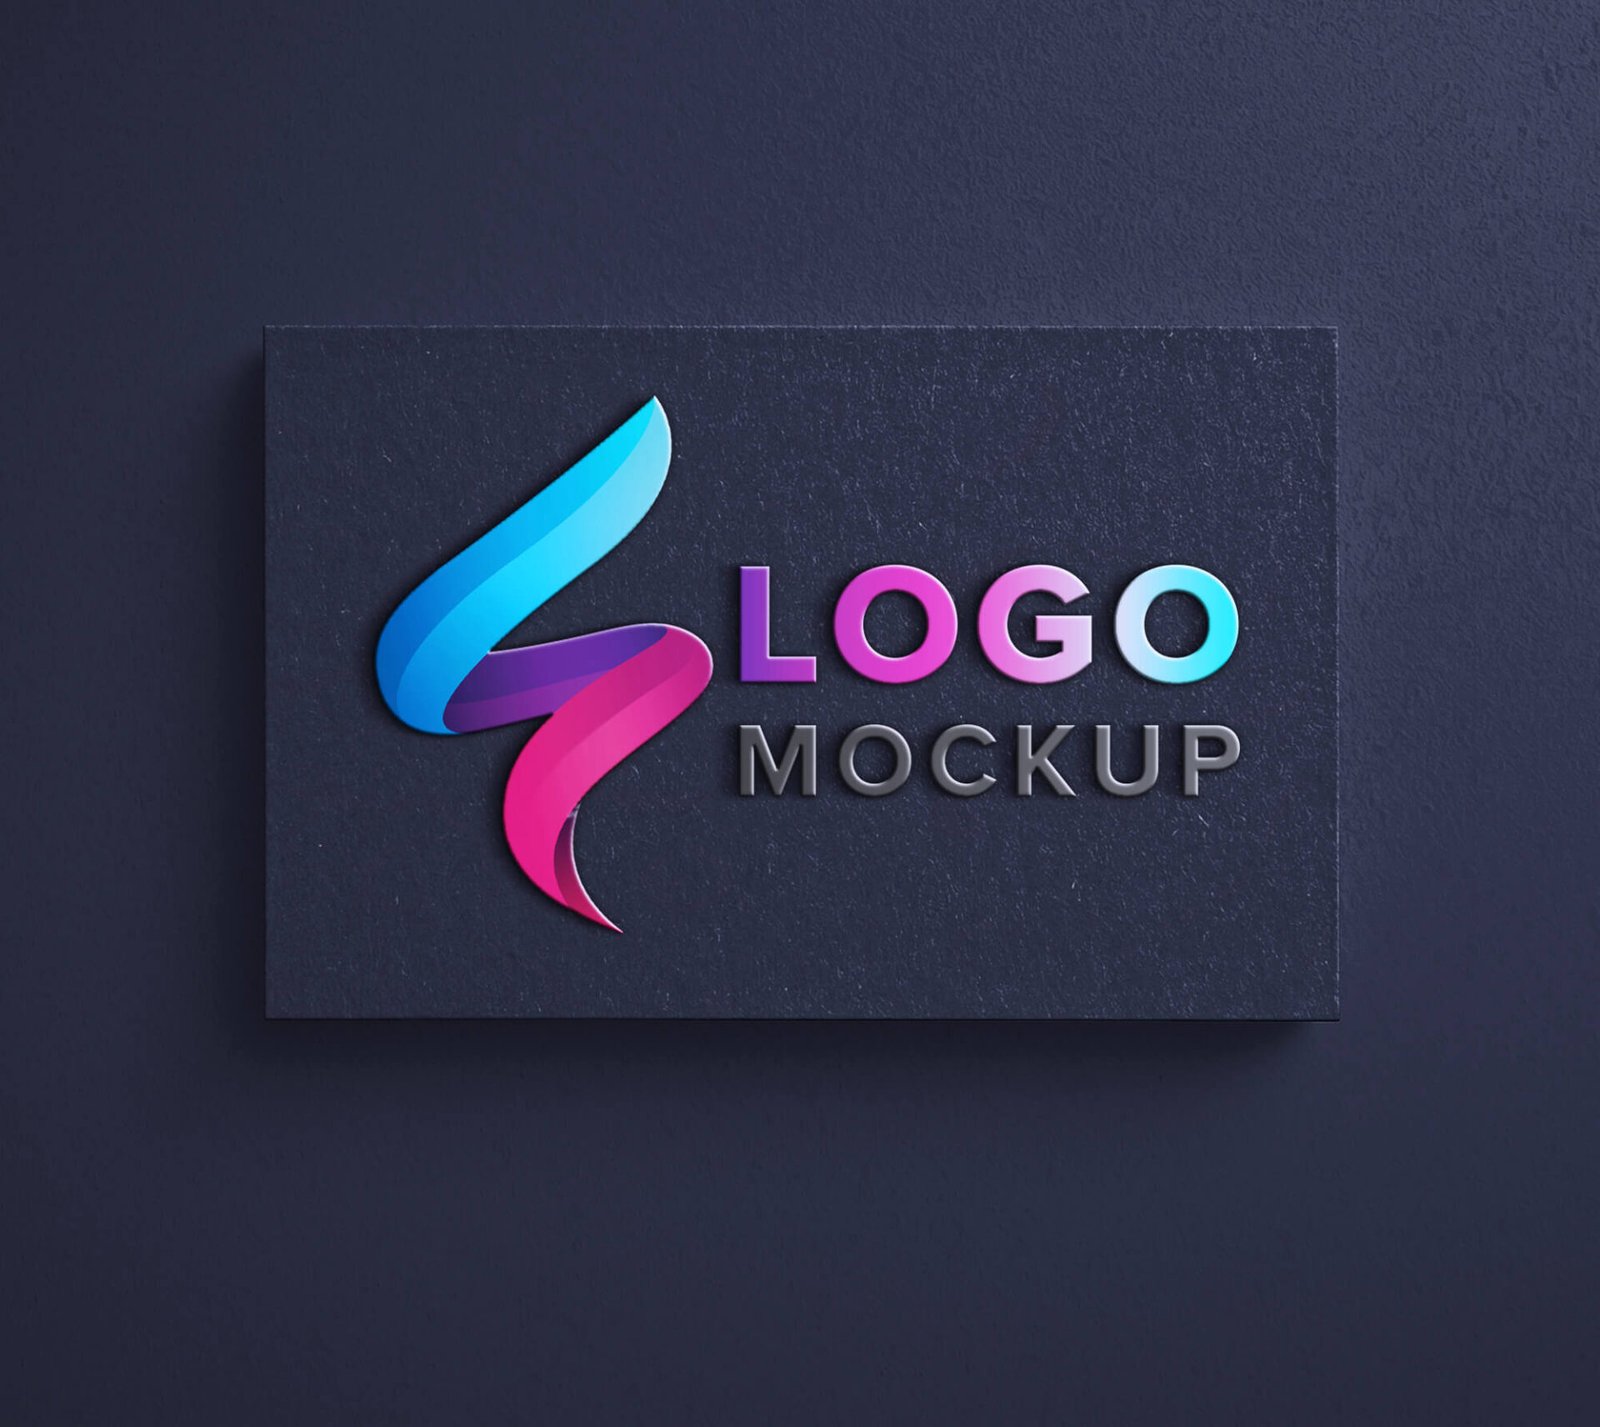 download logos for photoshop